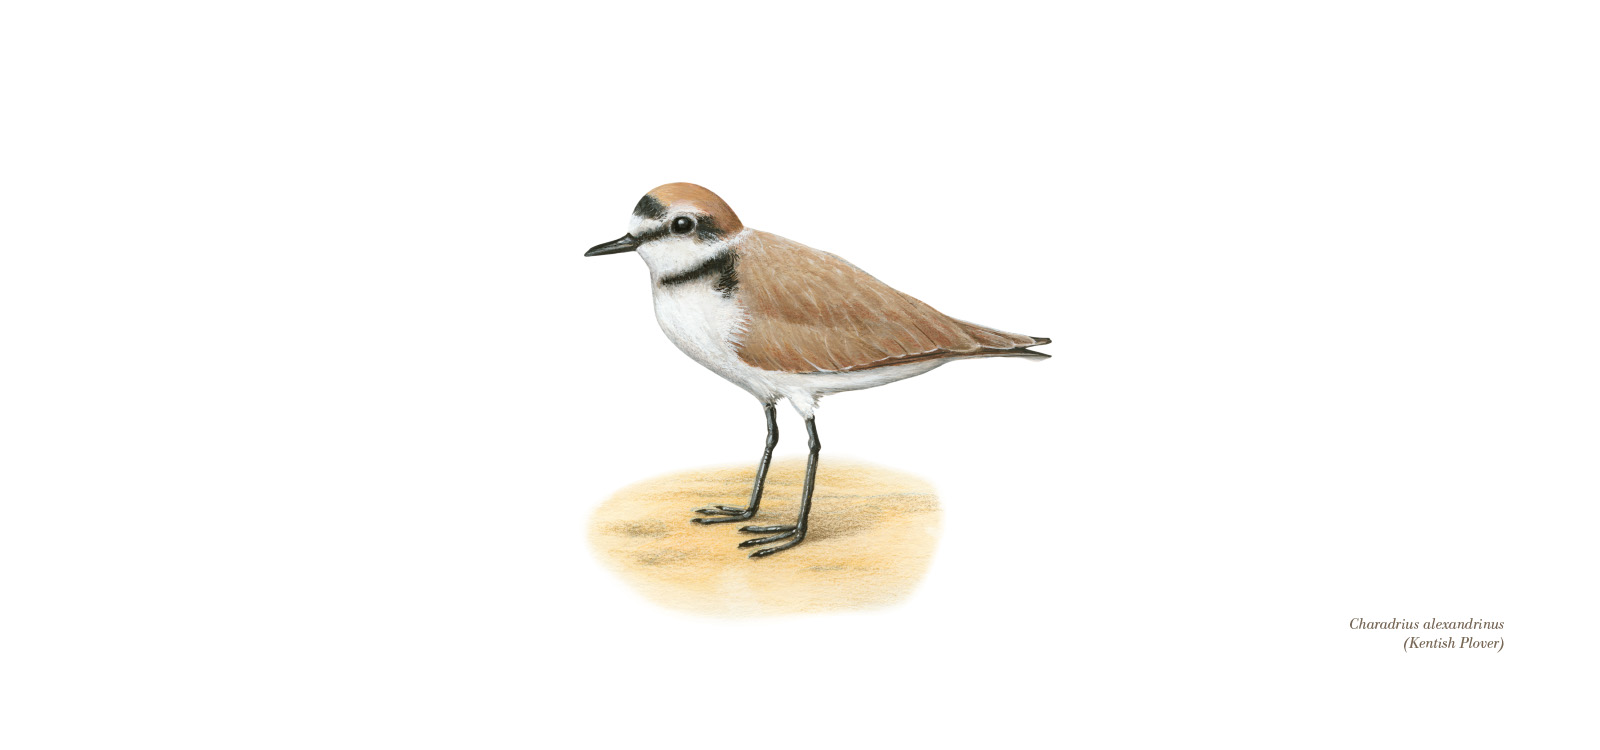 Kentish Plover by Lionel Portier